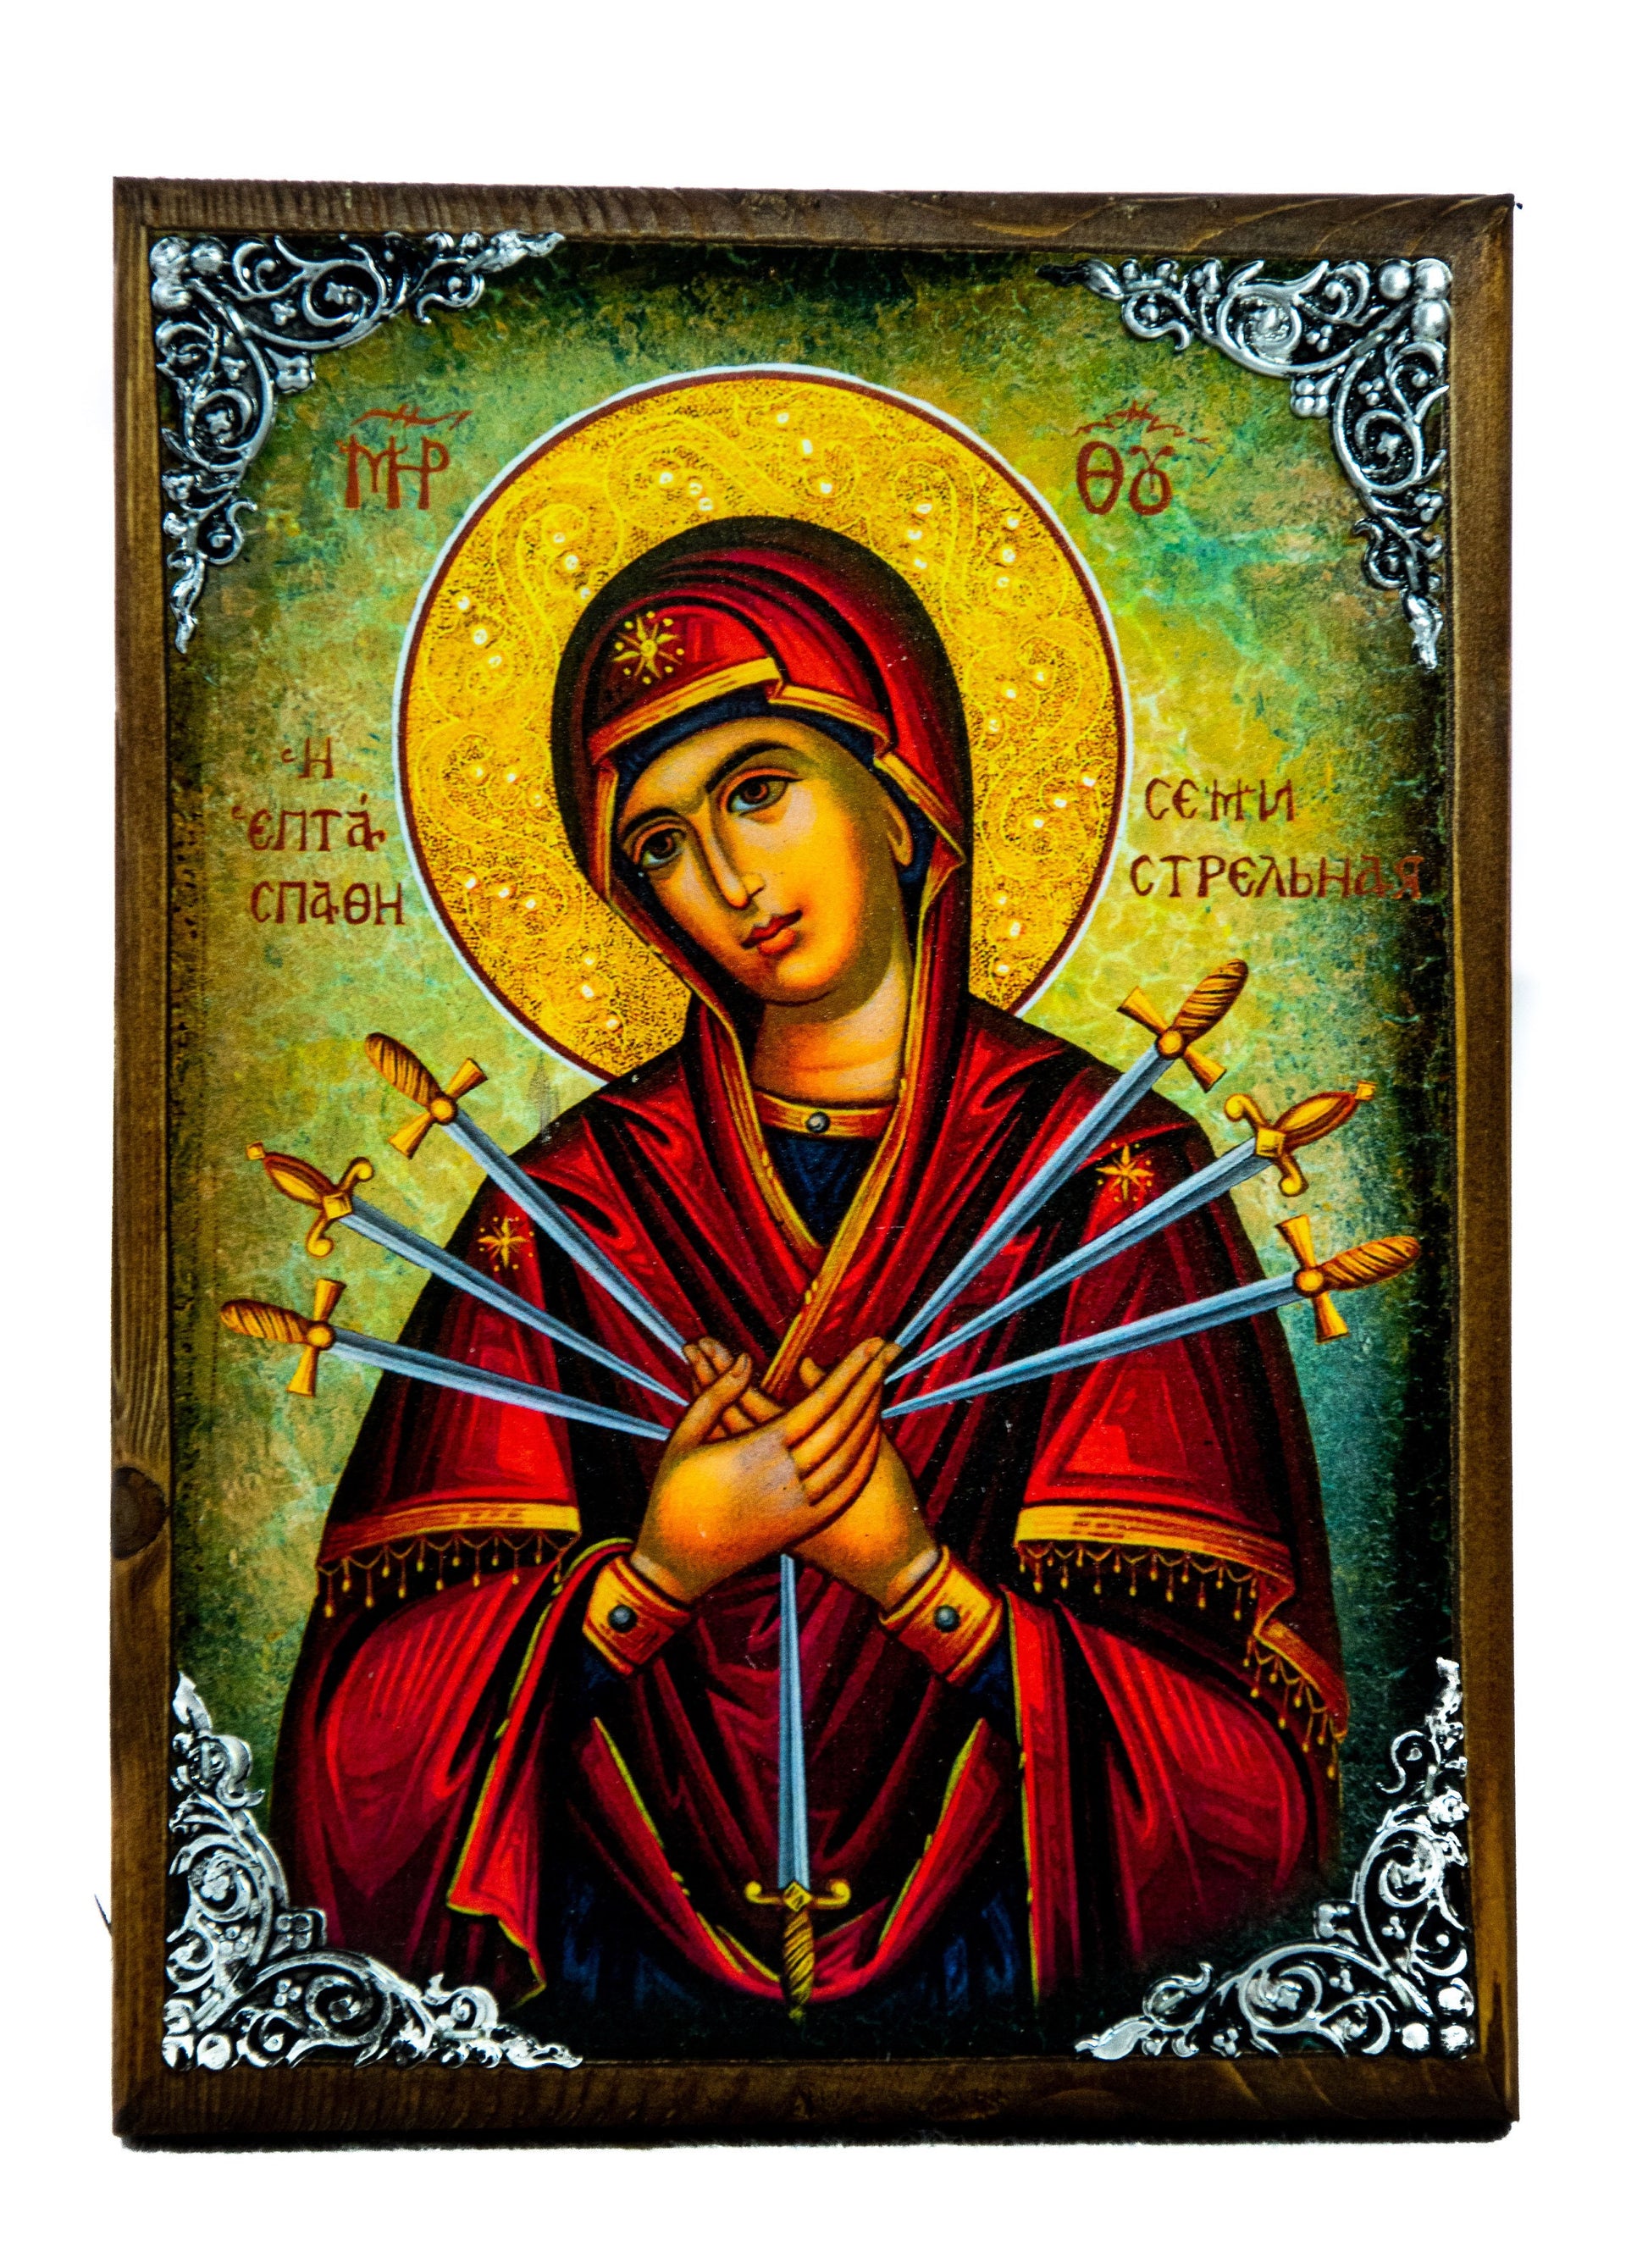 Our Lady of Sorrows icon, Virgin Mary icon Seven 7 swords, Handmade Greek Orthodox Icon, Mother of God Byzantine art wall hanging plaque TheHolyArt